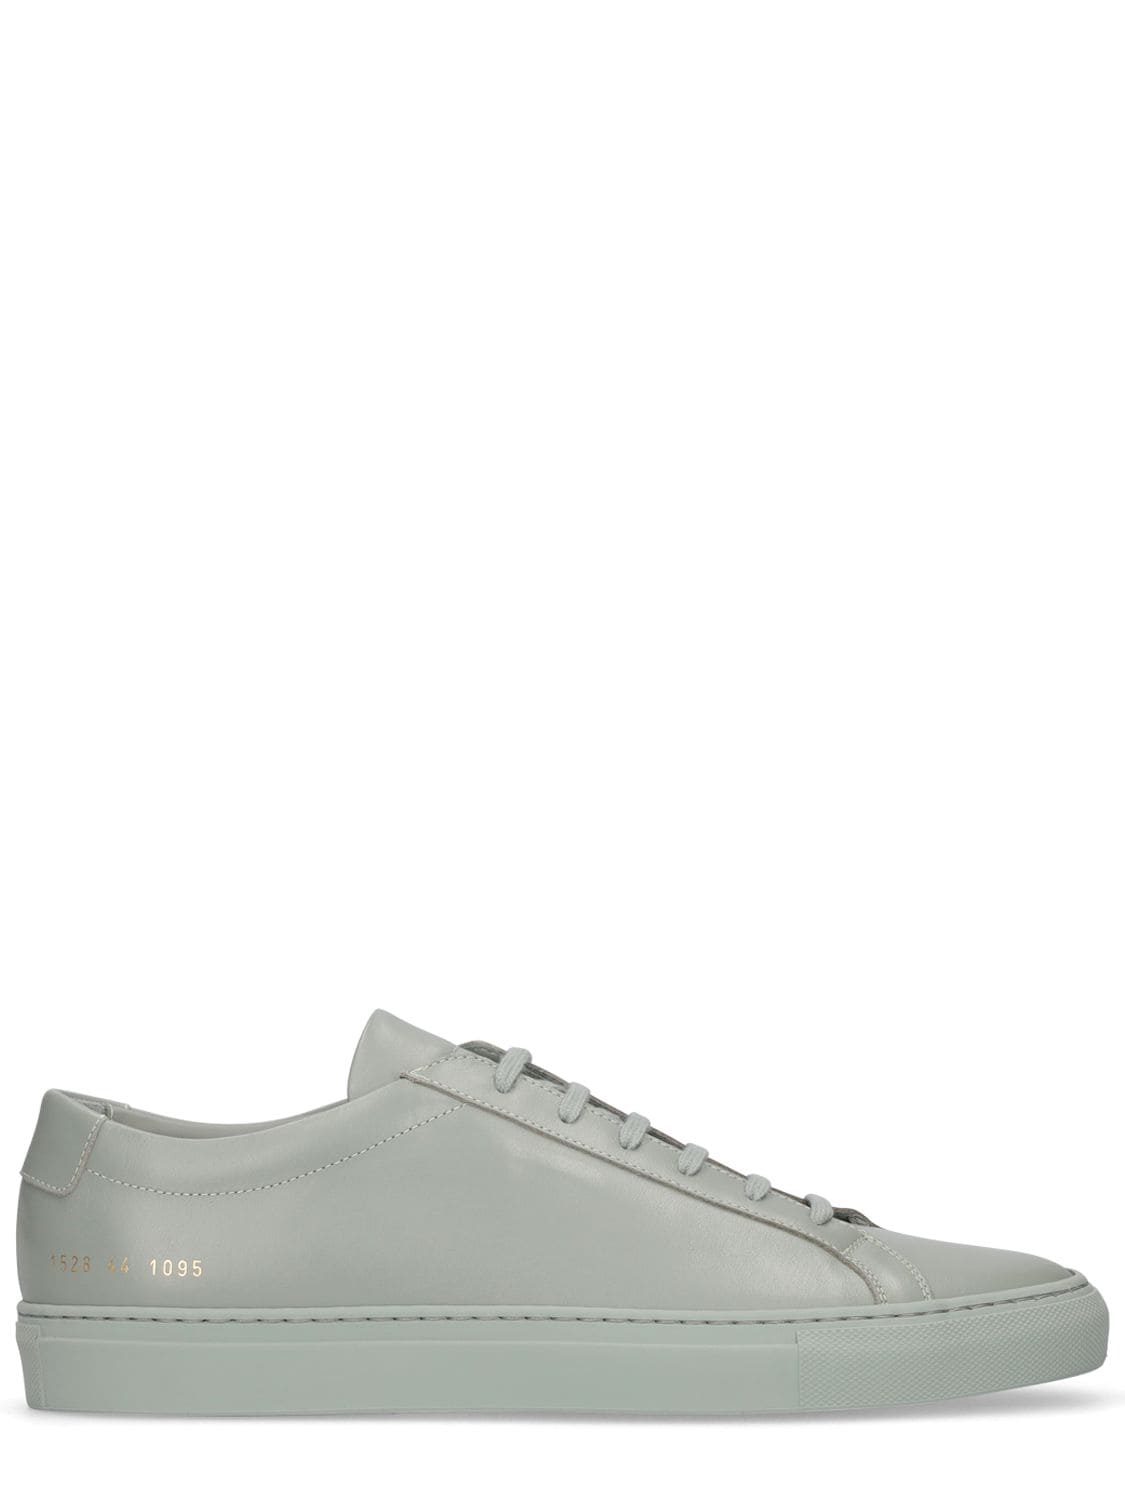 Common Projects Original Achilles Leather Sneakers In Vintage Green